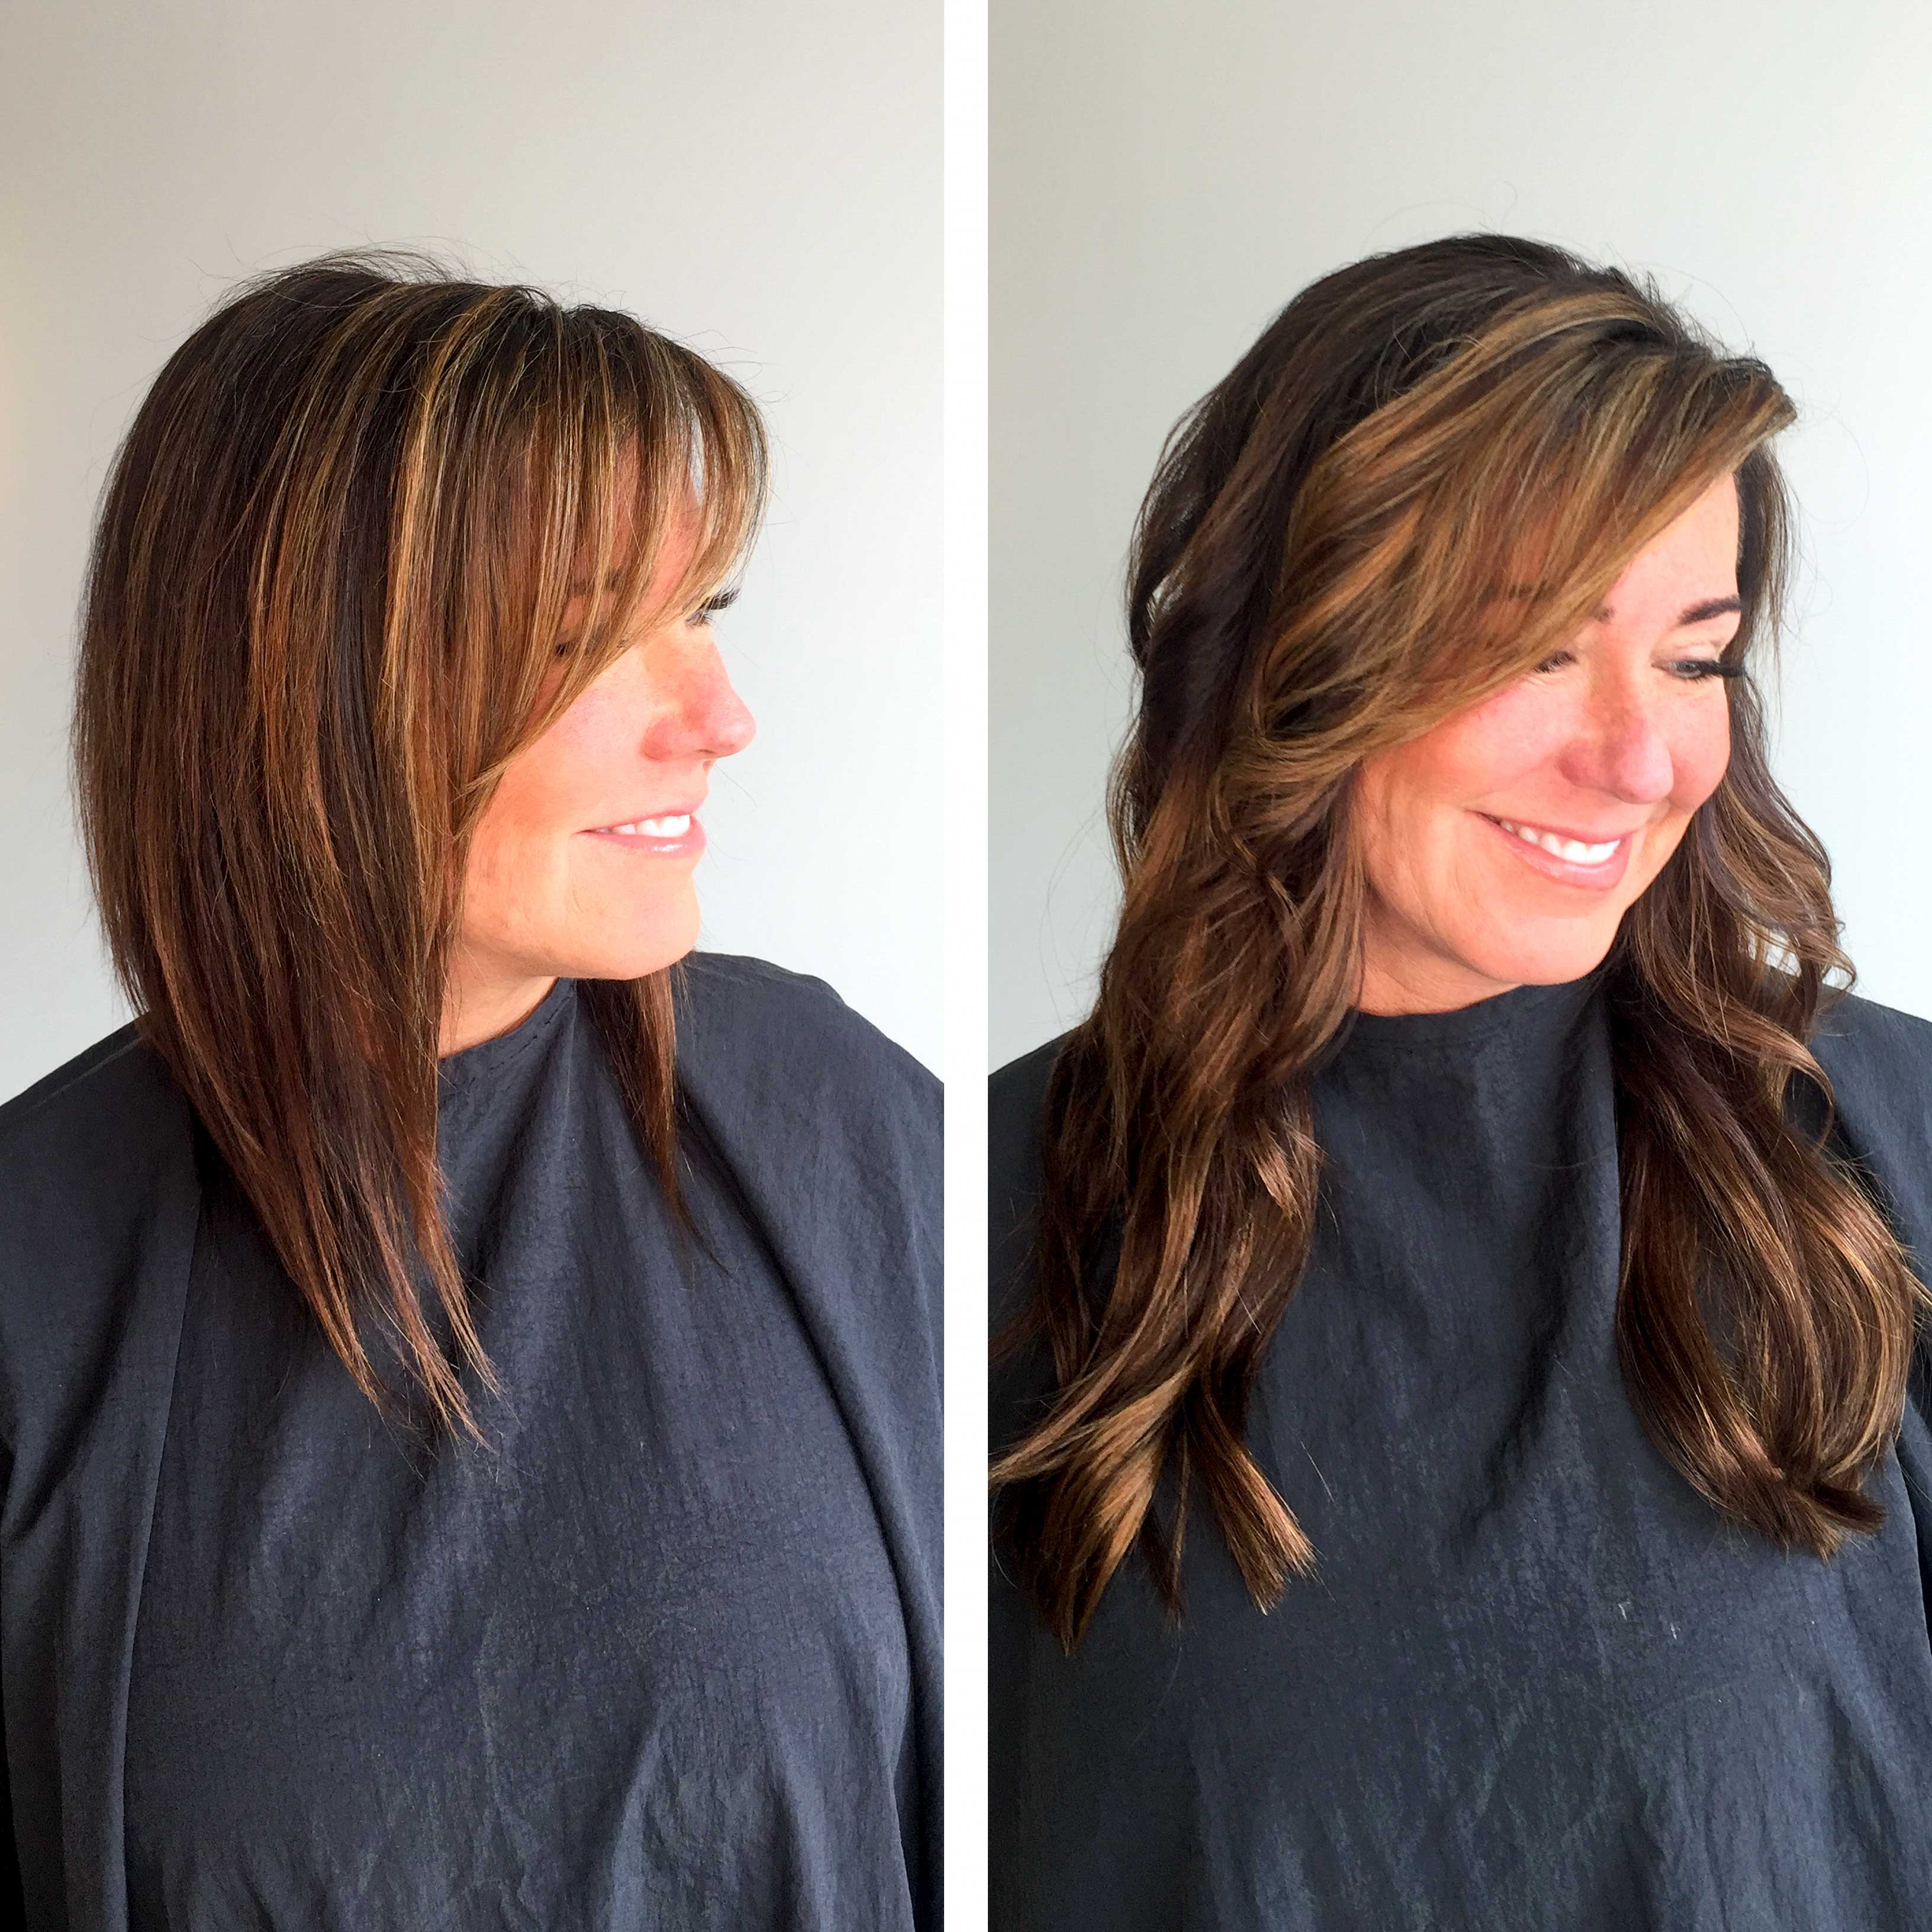 Hand Tied Hair Extensions | The Beautiful Co. Salon